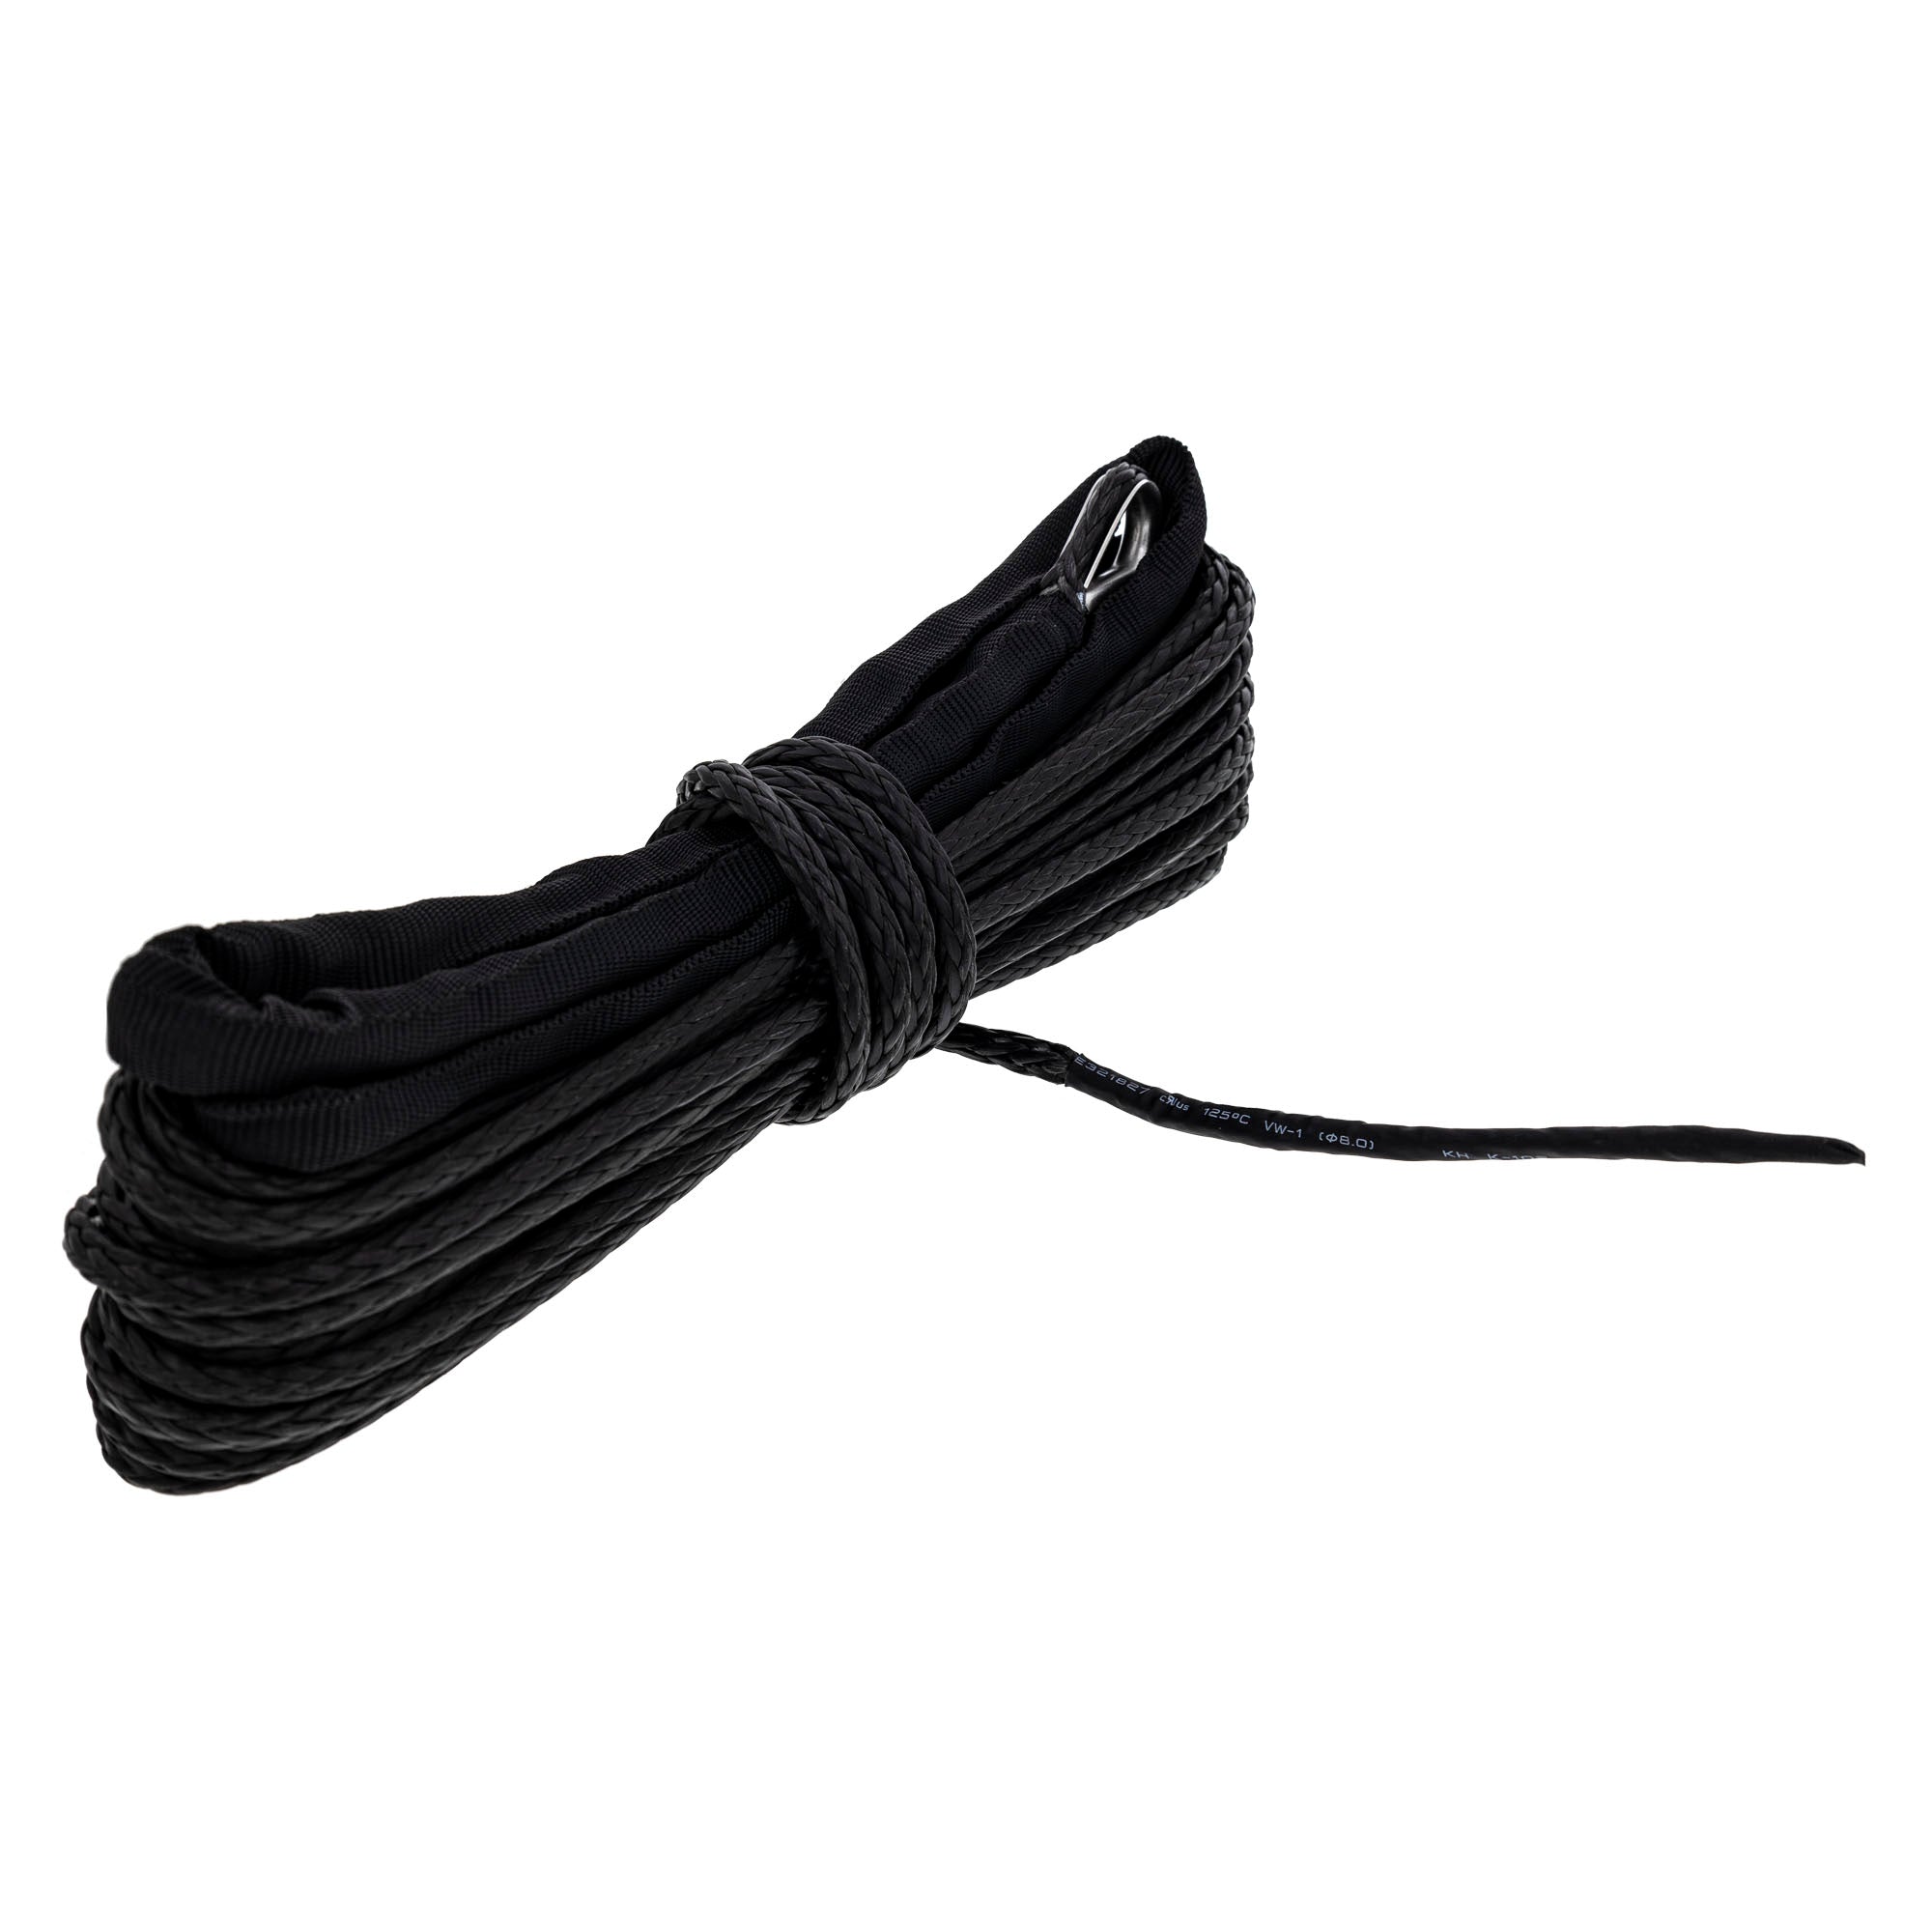 Kimpex Winch Replacement Part Black #158547